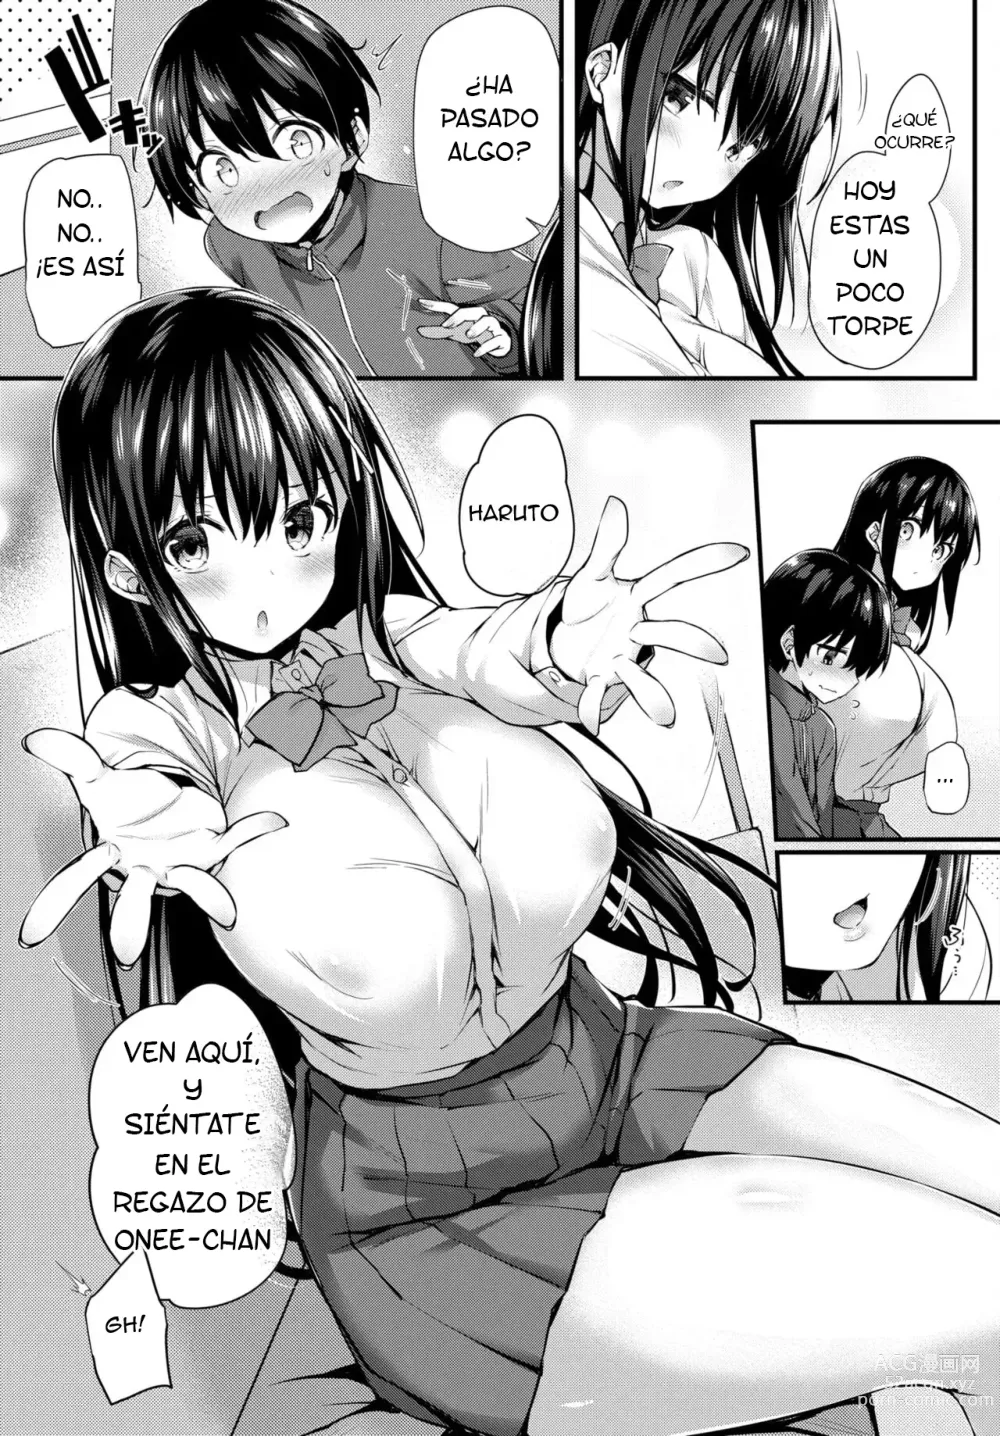 Page 17 of manga Boku no Onee-chan - My beloved was defiled and taken from me...